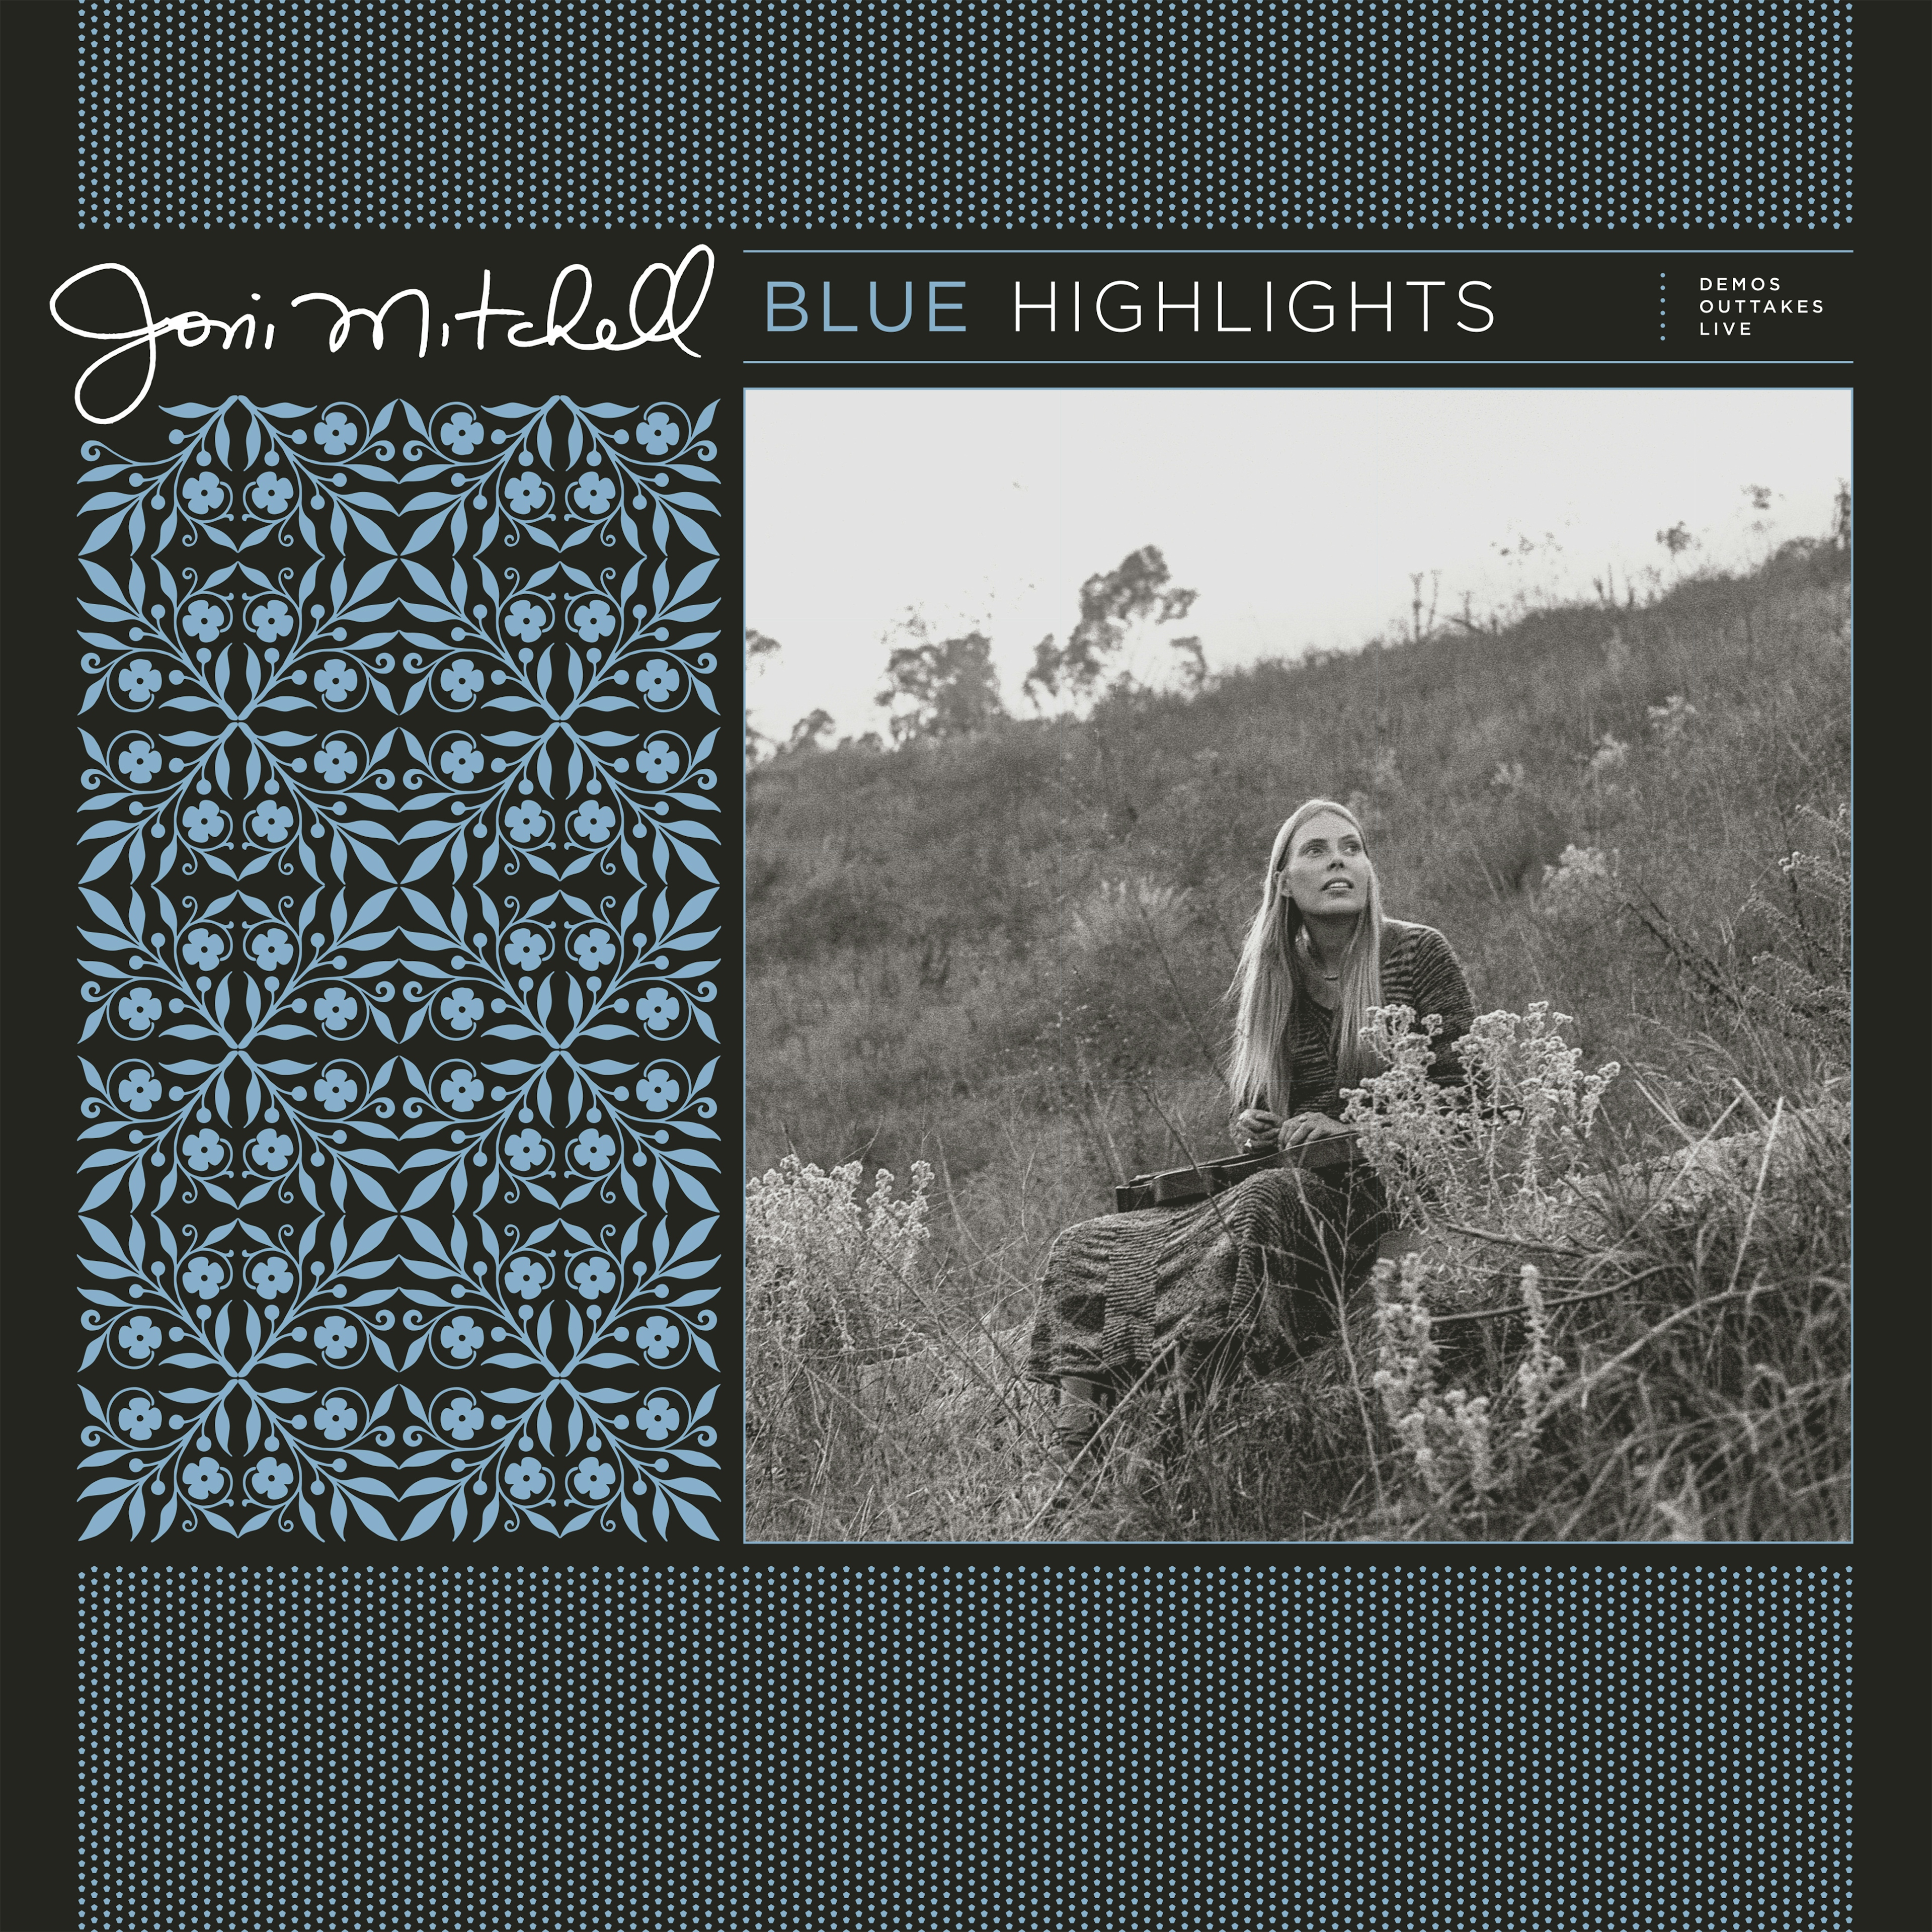 Album artwork for Album artwork for Blue 50: Demos, Outtakes And Live Tracks From Joni Mitchell Archives, Vol. 2 by Joni Mitchell by Blue 50: Demos, Outtakes And Live Tracks From Joni Mitchell Archives, Vol. 2 - Joni Mitchell